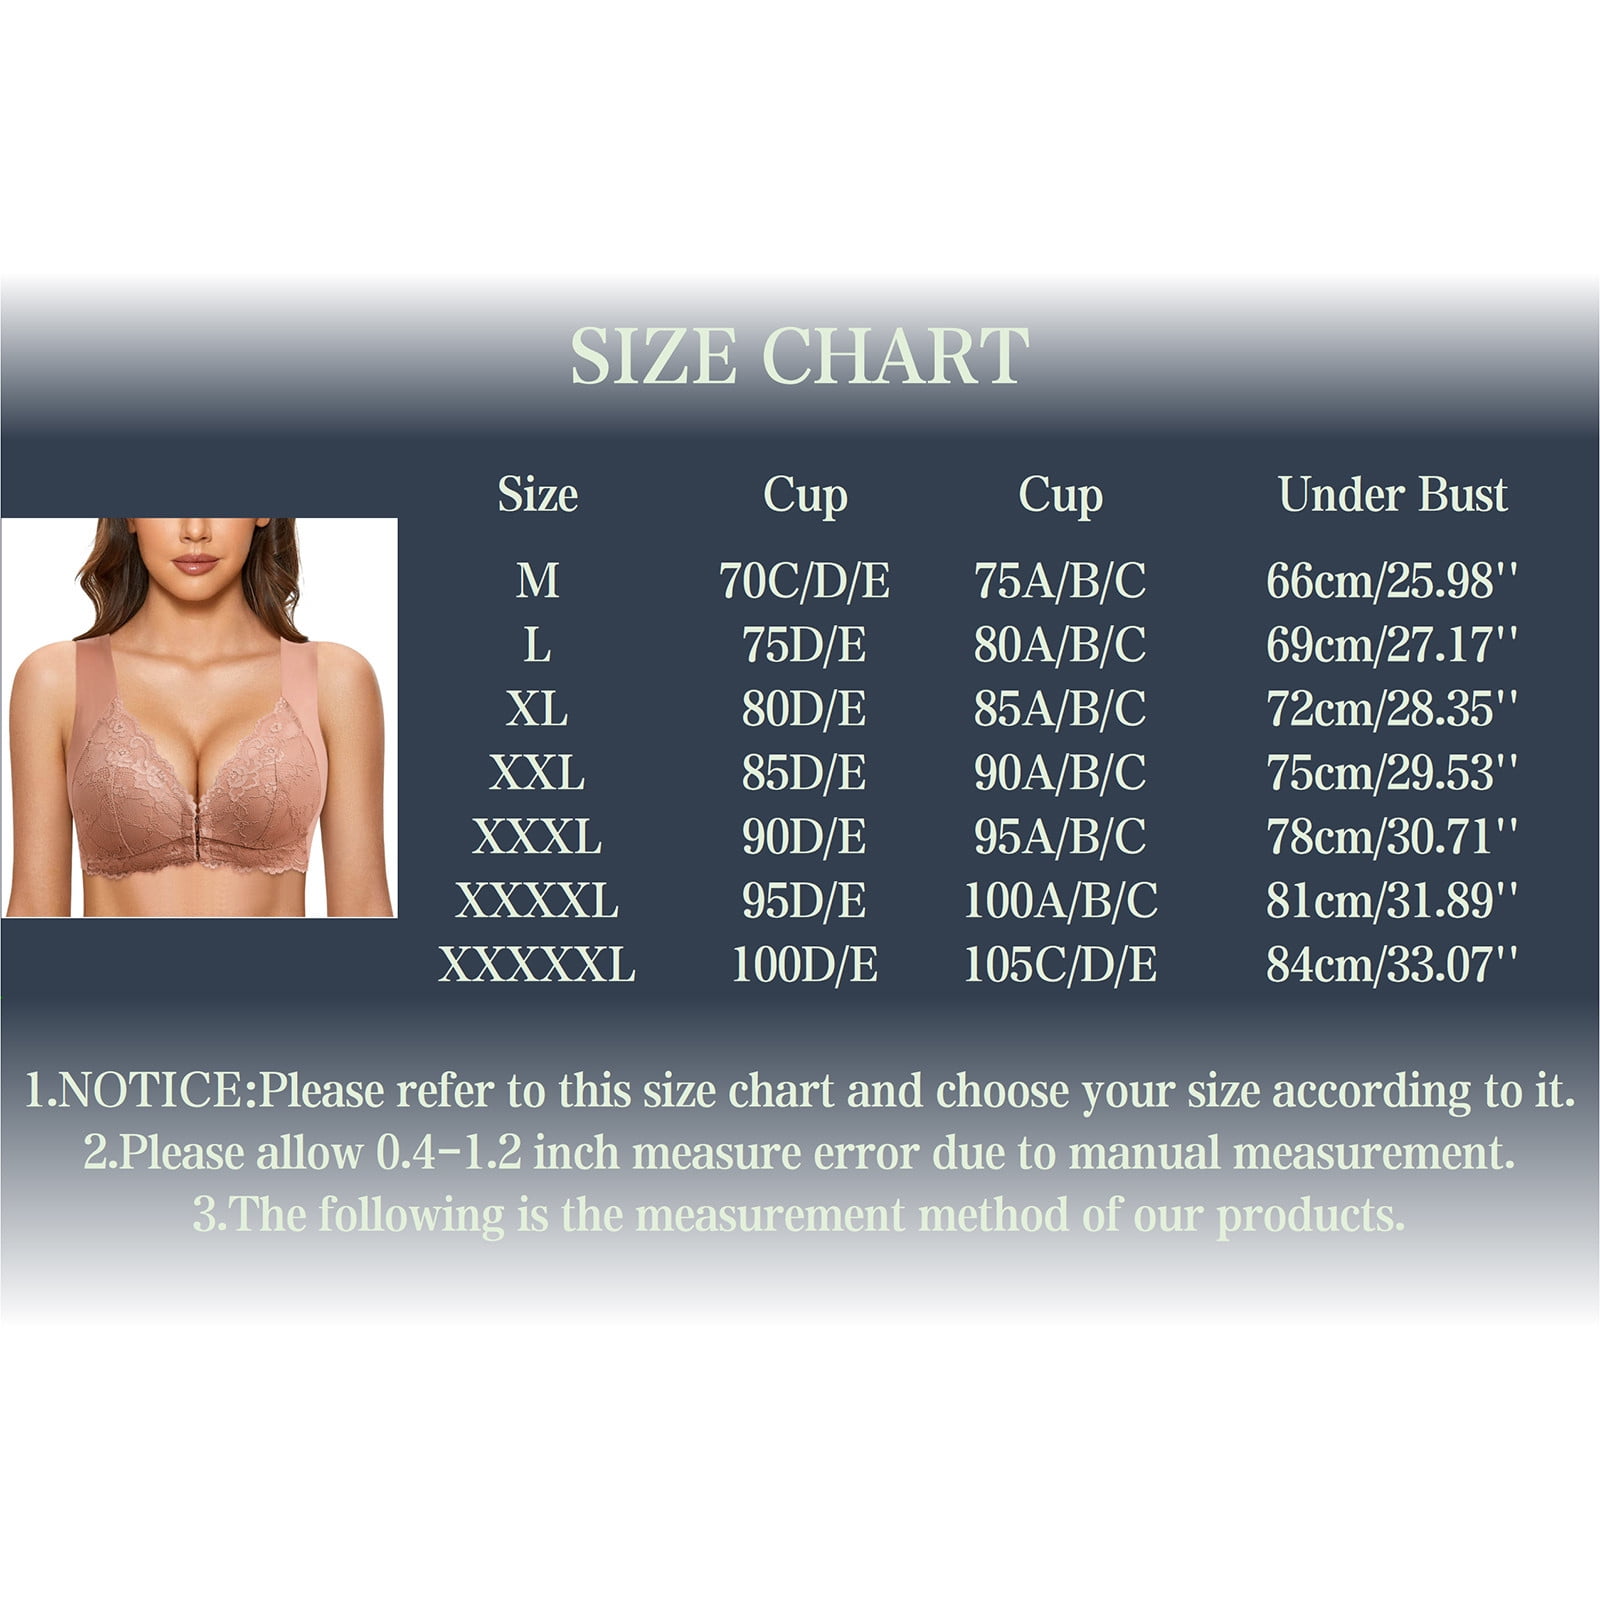 zuwimk Bras For Women Plus Size, Push-Up Bra with Wonderbra Technology,  Smoothing Lace-Trim Bra with Push-Up Cups Beige,85E